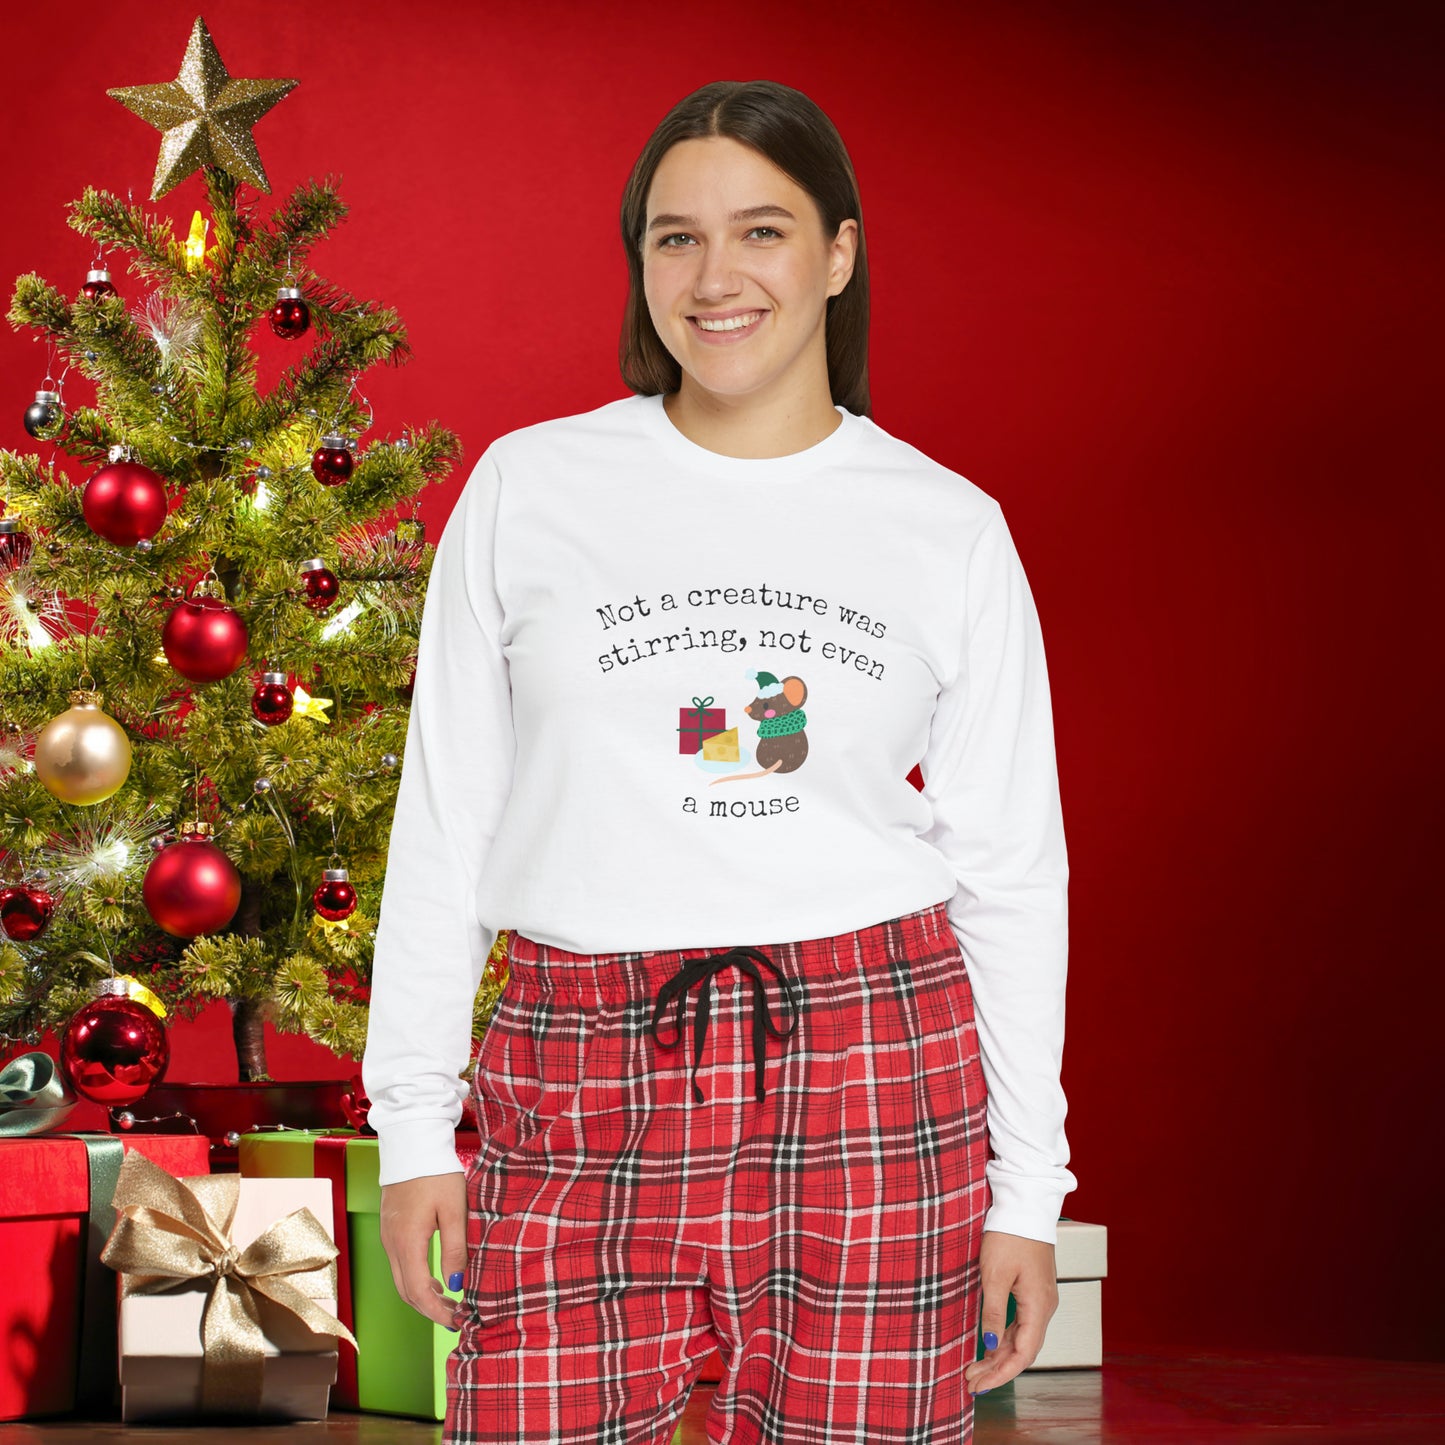 Women's Long Sleeve Pajama Set, Family Christmas Pajamas, Flannel Pants, "Not a creature was stirring, not even a mouse"